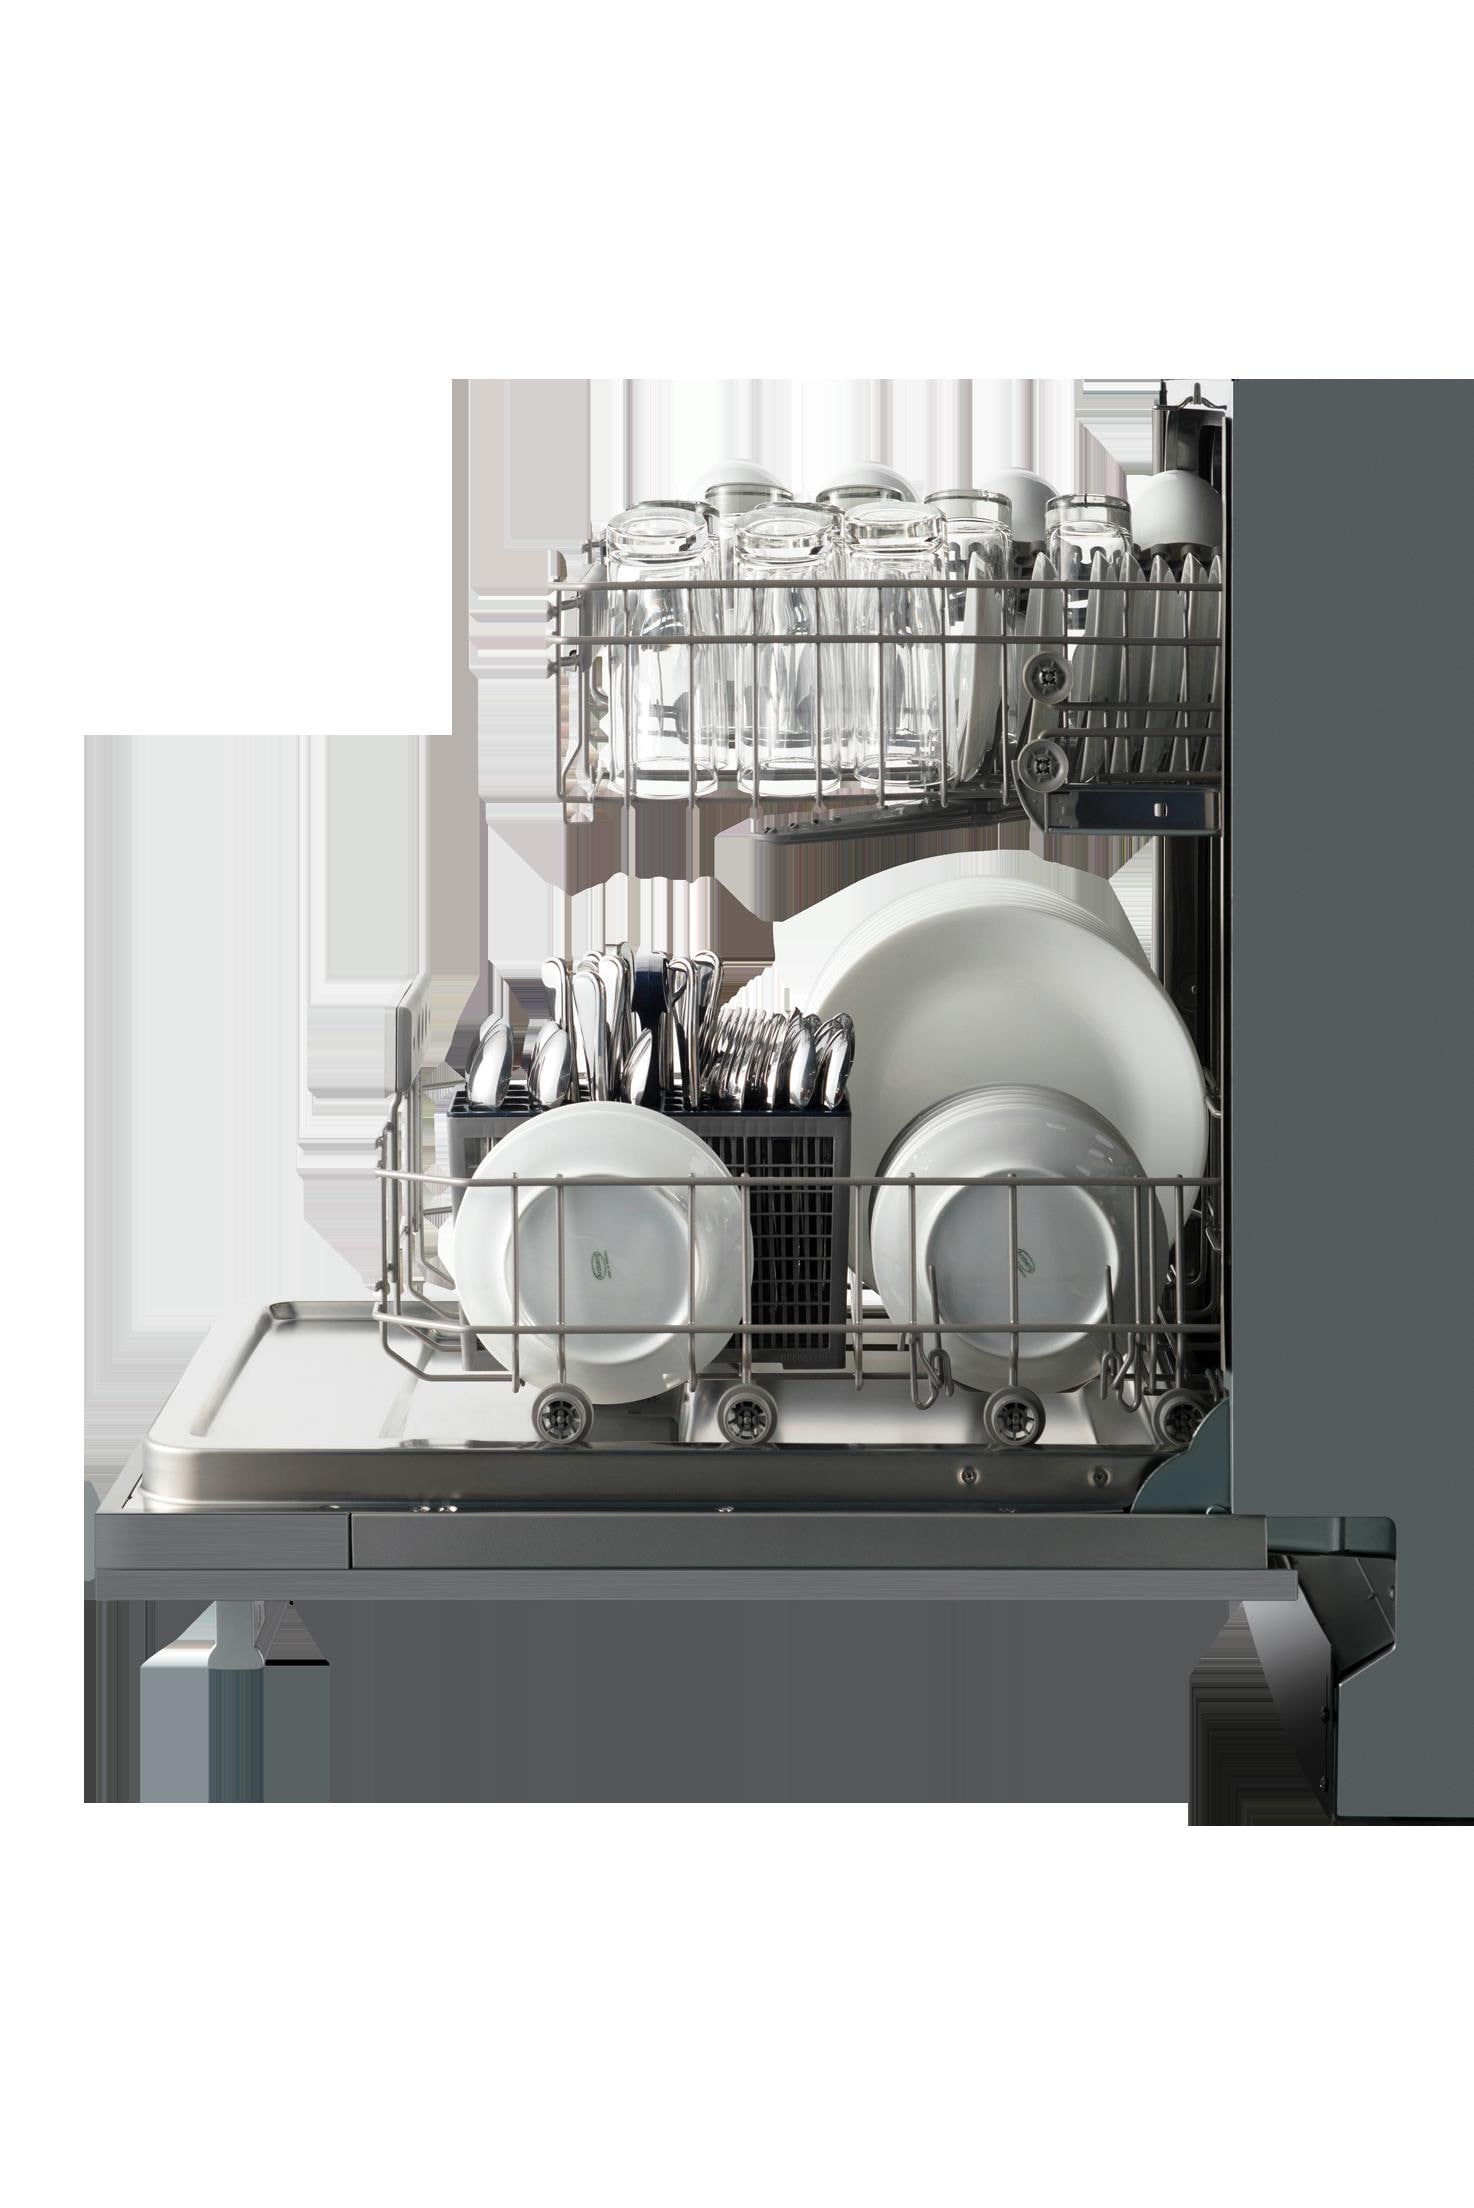  Galanz GLDW09TS2A5A Built in Dishwasher, 9 Place Setting, 18  Inch, 6 Cycles, 3 Options, Stainless Steel : Home & Kitchen